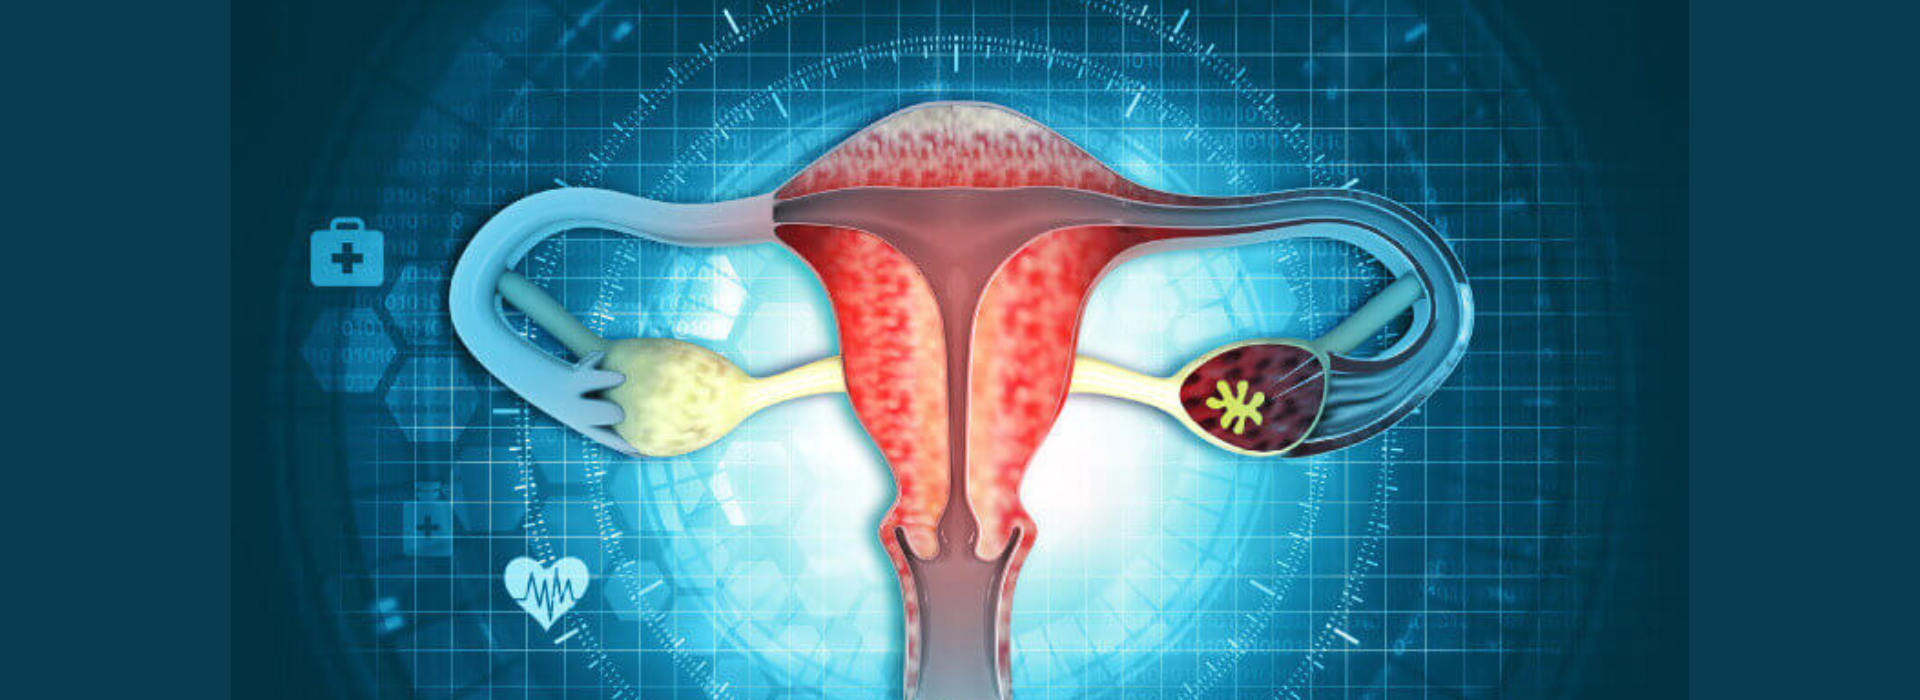 Decoding the Diagnostic Tests for Uterine Cancer